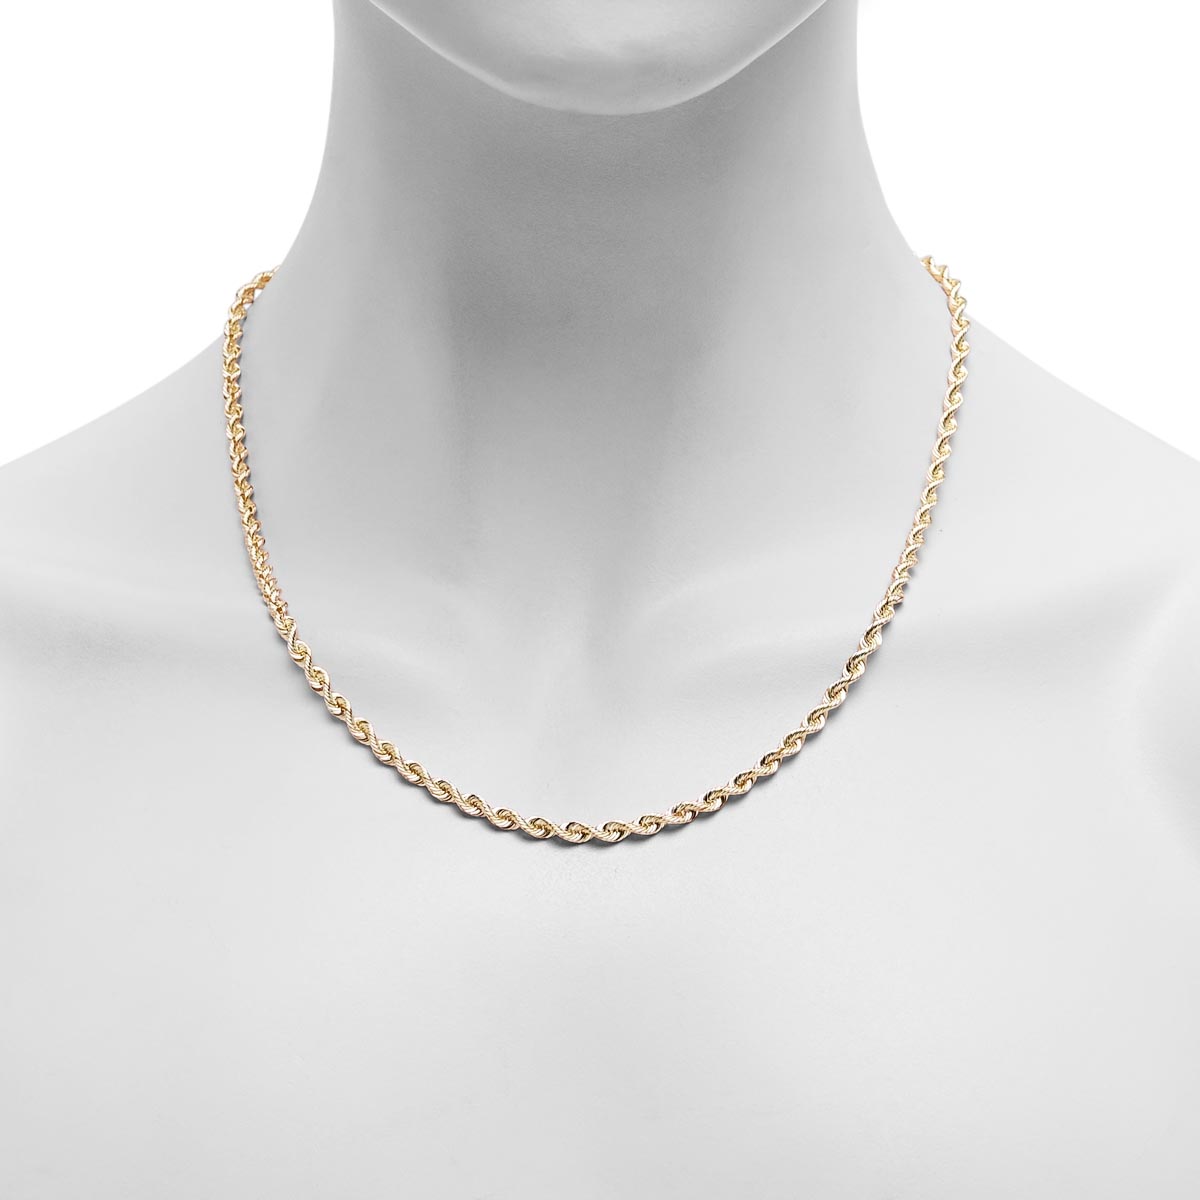 Silk Rope Chain in 14kt Yellow Gold (20 Inches and 3.7mm Wide)